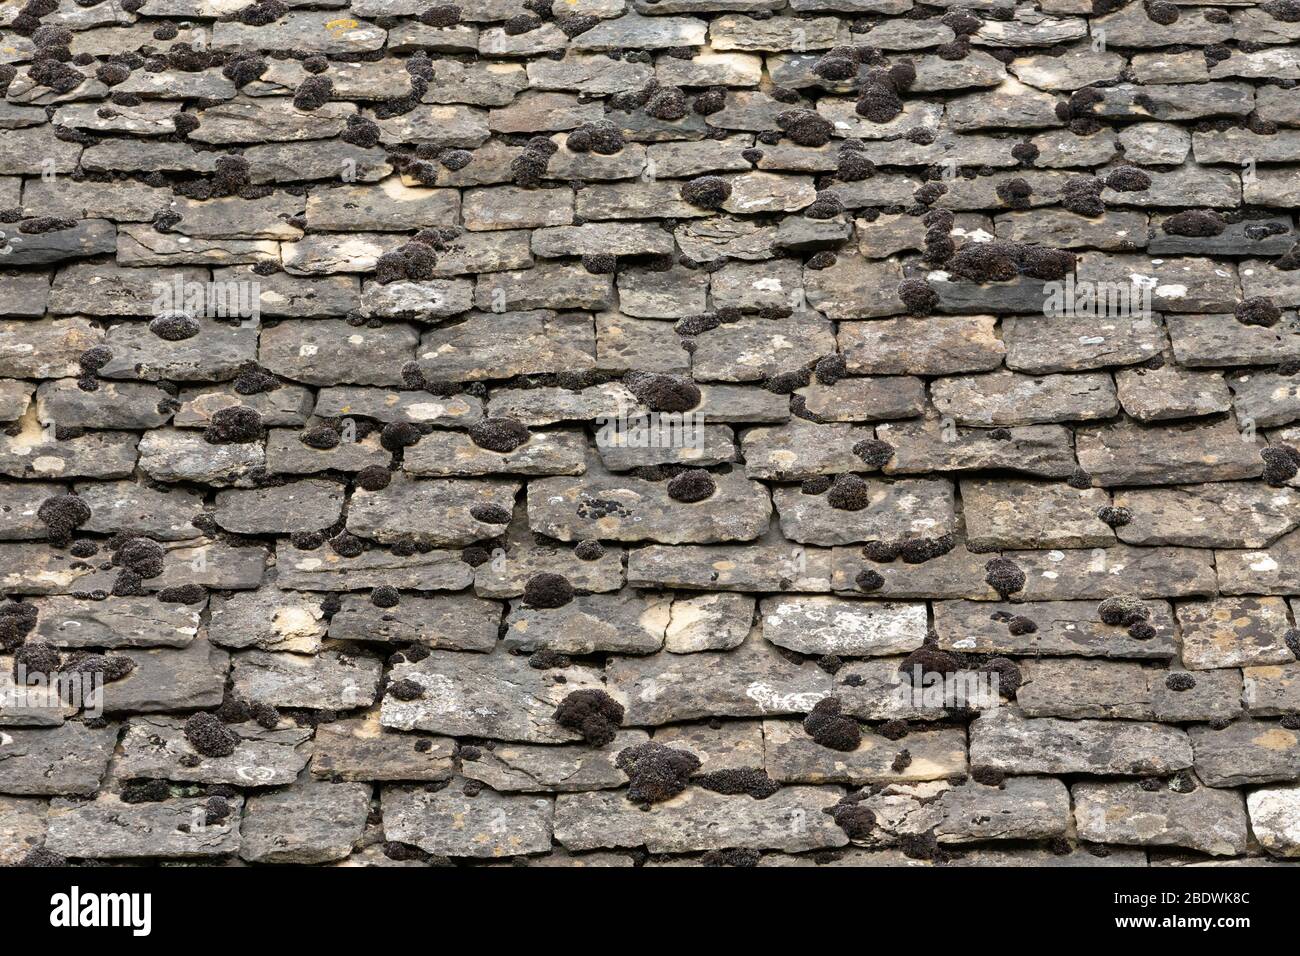 Old-Fashioned roof tiles in the village of Stanton in the Cotswolds, England Stock Photo